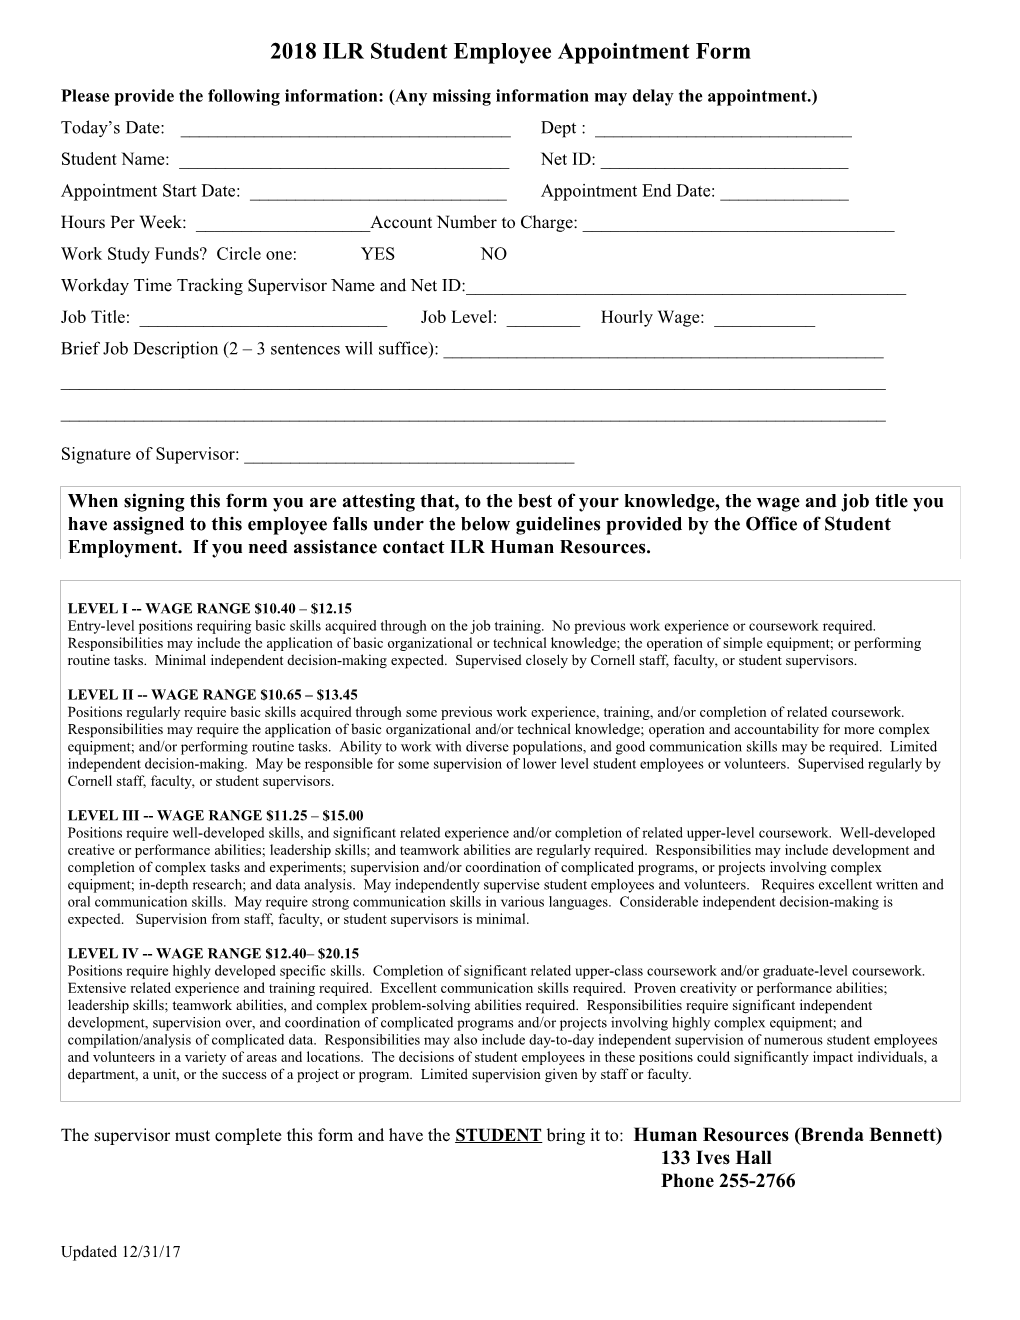 CHE Student Employment Hire Form